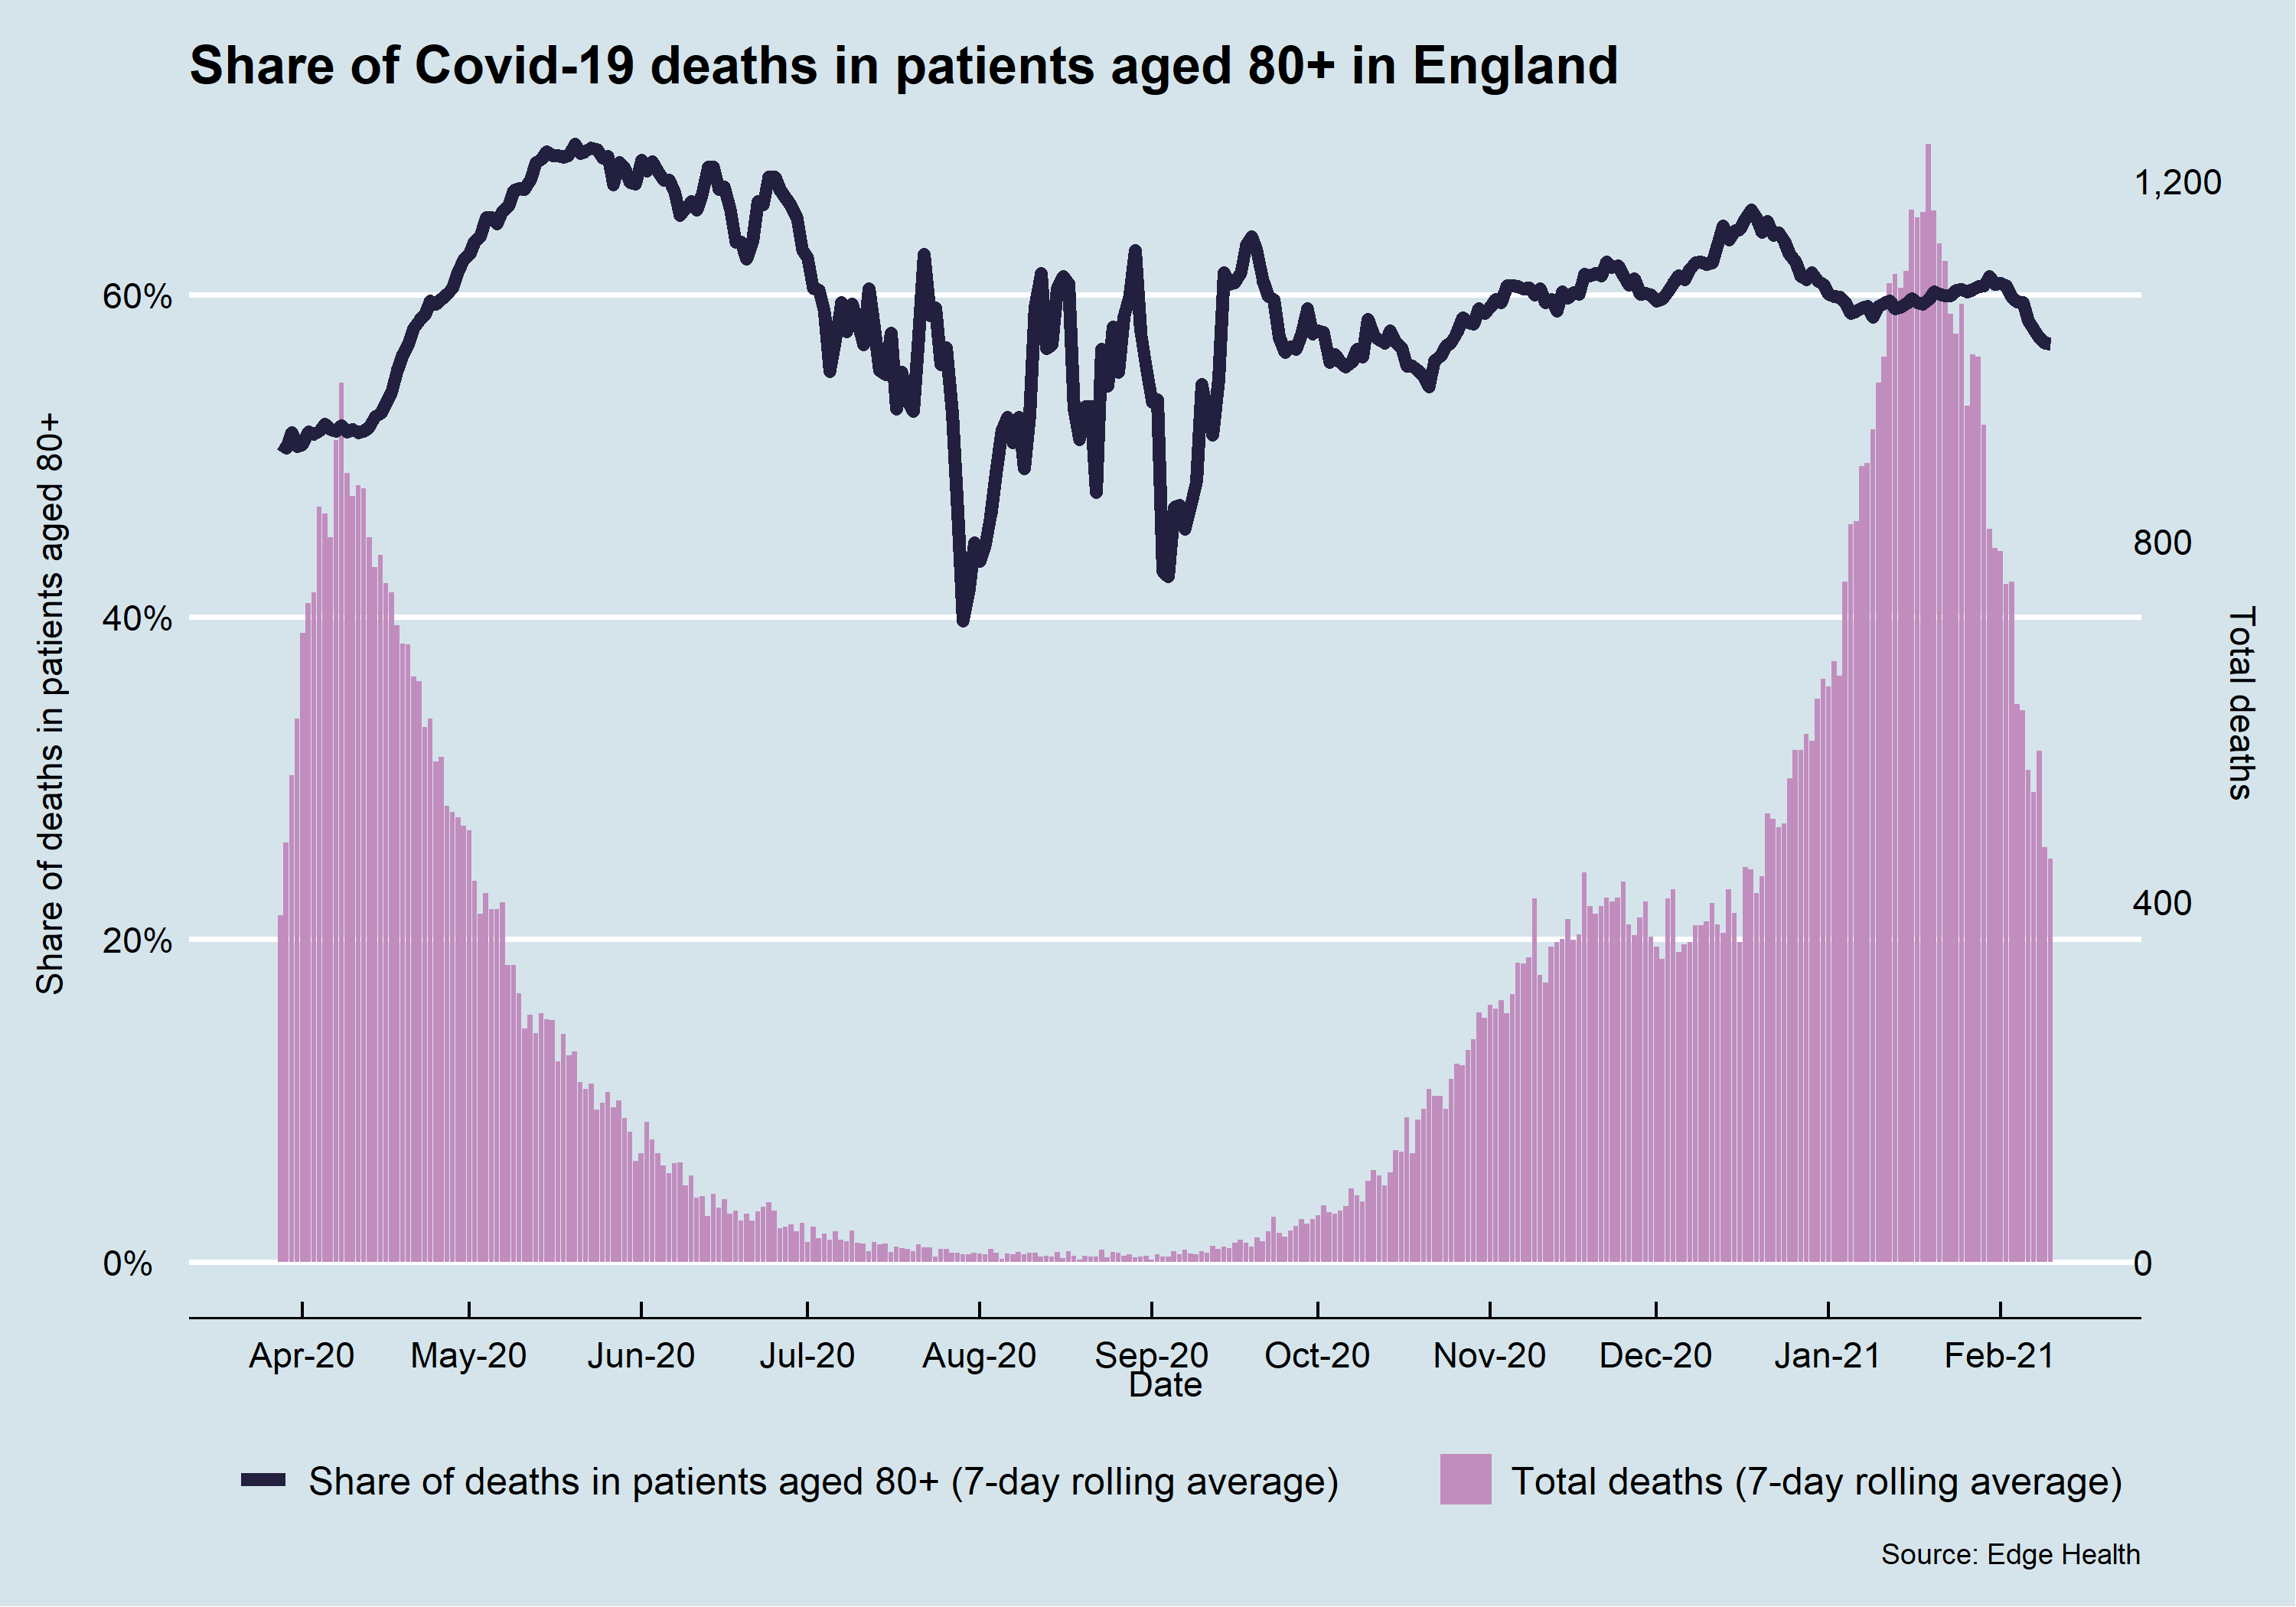 Analysis by Edge Health shows a signficant fall in deaths among those aged over 80 since the end of January